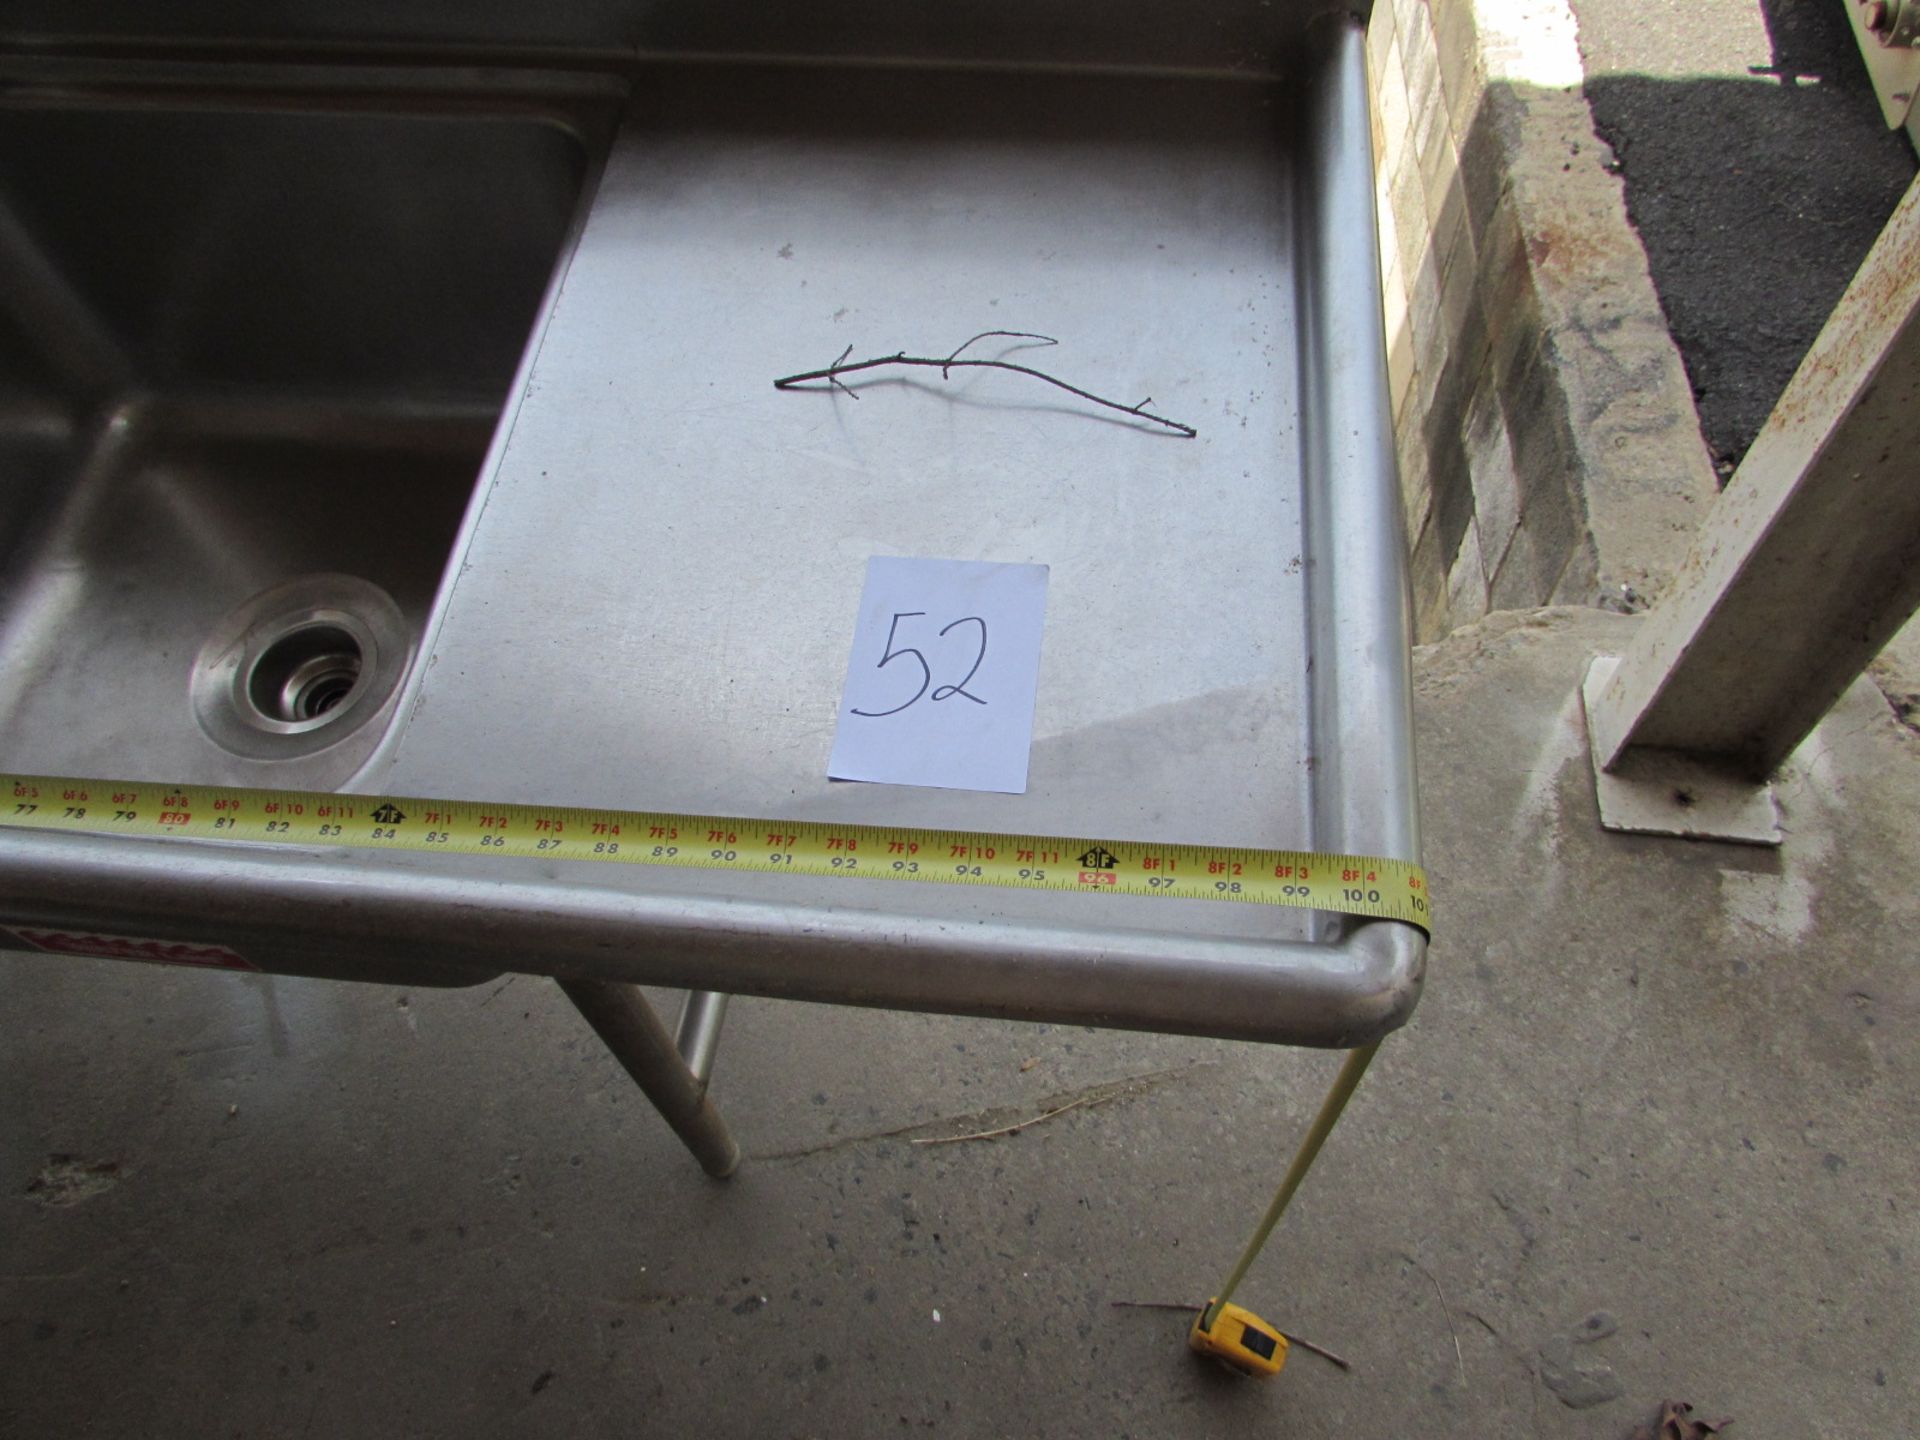 Stainless Steel Sink 3 Compartment with 2 Drainboards and Legs - Image 2 of 7